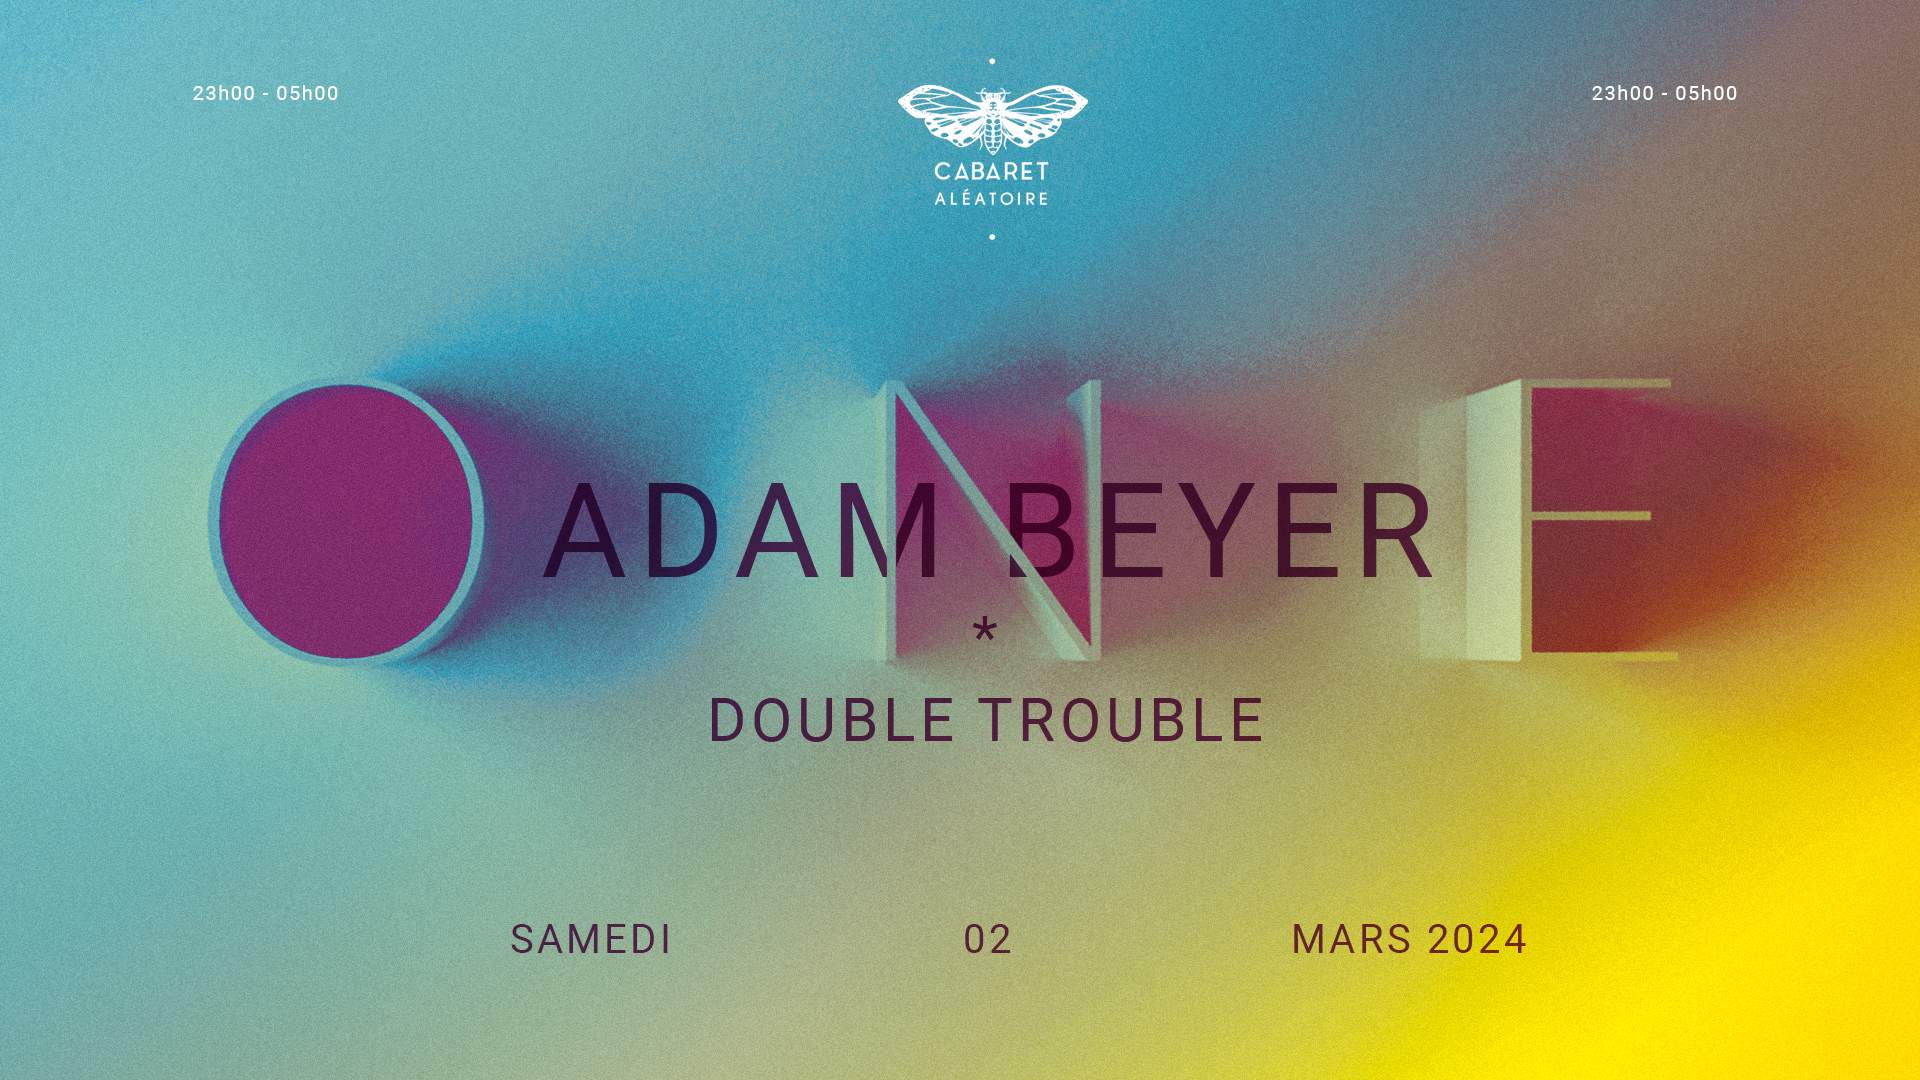 ONE with Adam Beyer & Double Trouble - フライヤー表